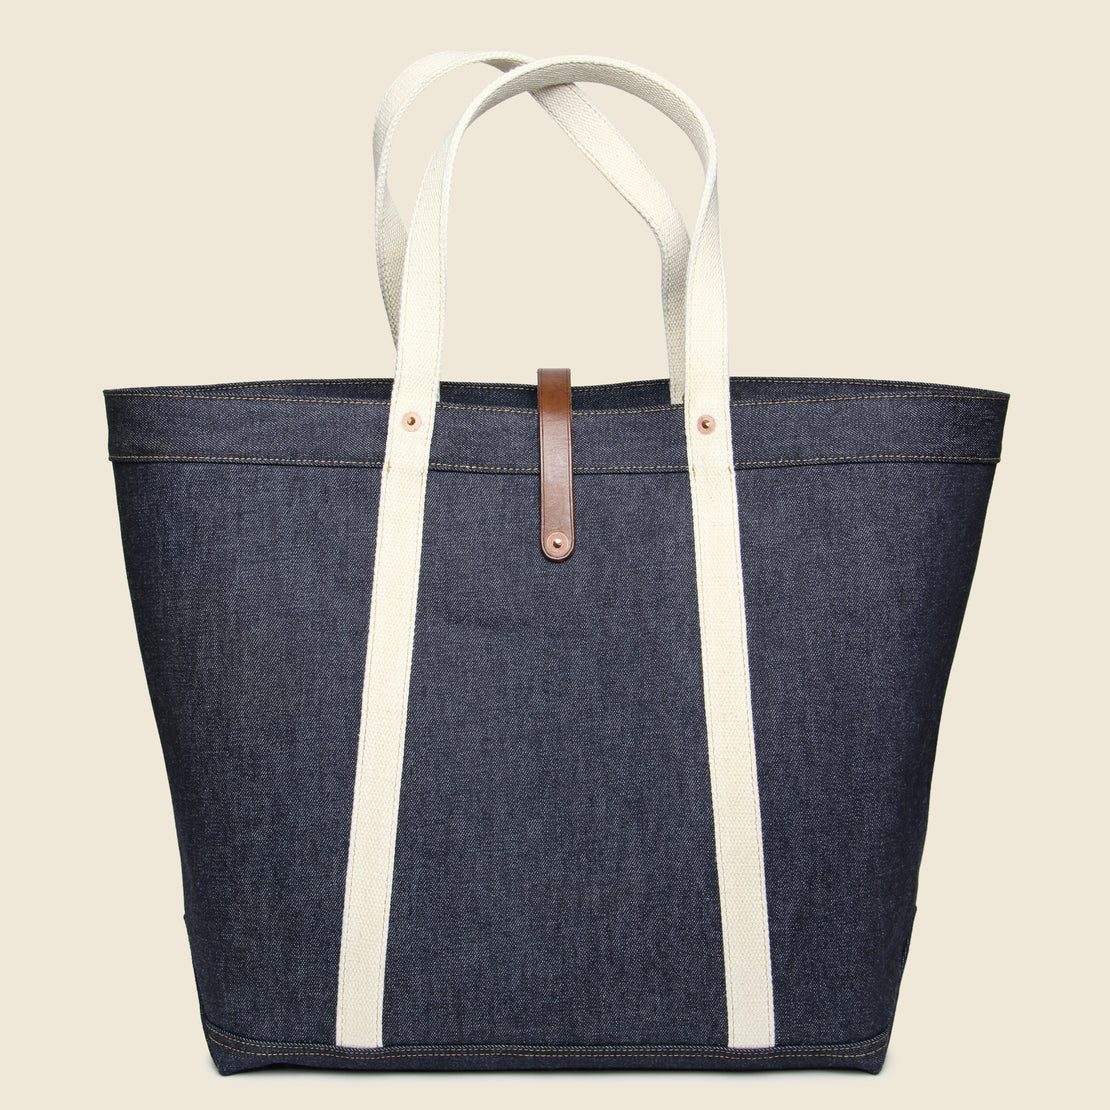 Murphy Denim Tote - Indigo - RRL - STAG Provisions - Accessories - Bags / Luggage